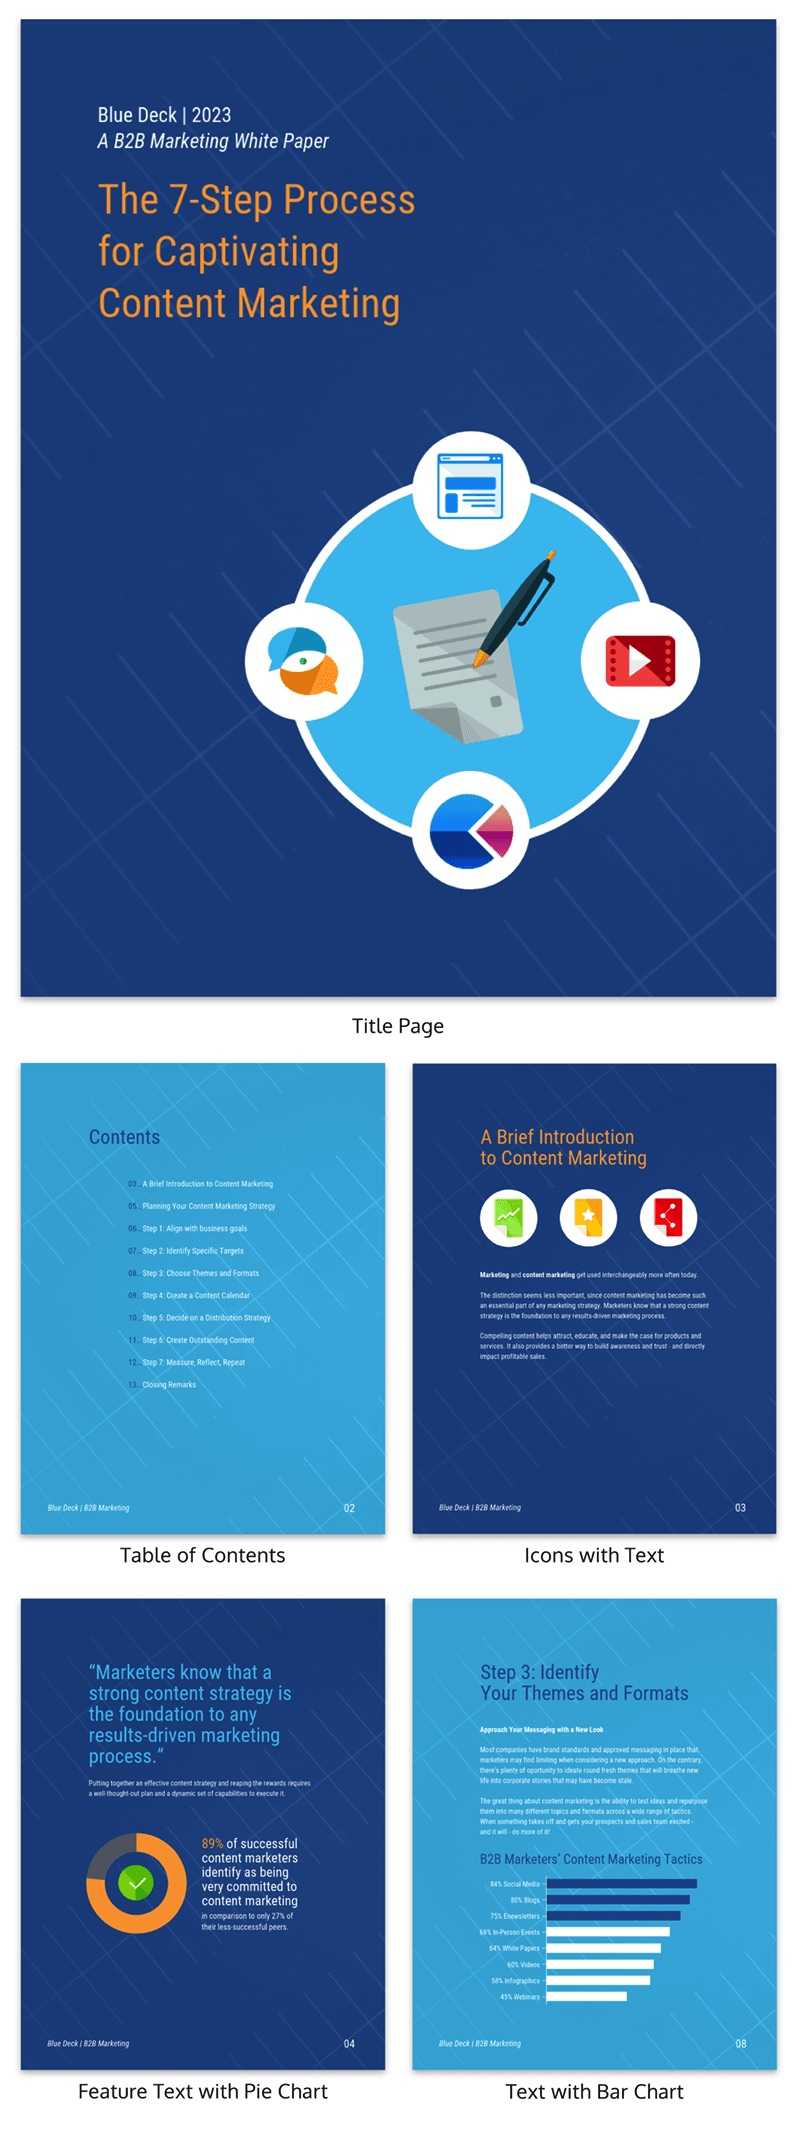 30+ Business Report Templates Every Business Needs – Venngage Within Business Quarterly Report Template